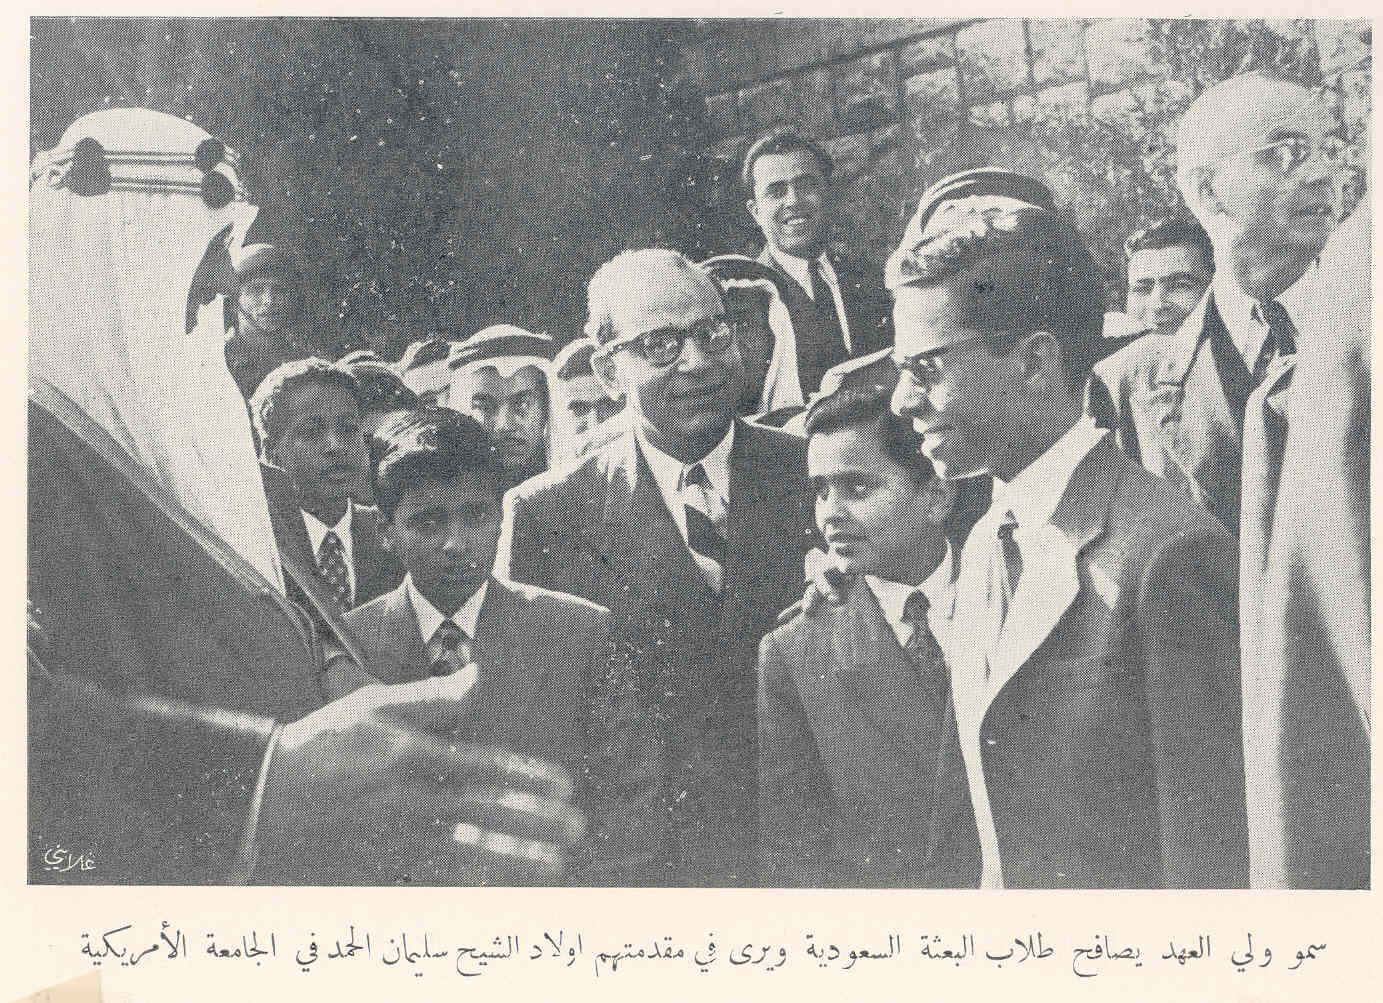 Crown mediates Mayor American University students the mission, including Saudi Arabia and see first-Sheikh Suleiman Hamad and Sheikh Abdullah Saad 1953 Beirut